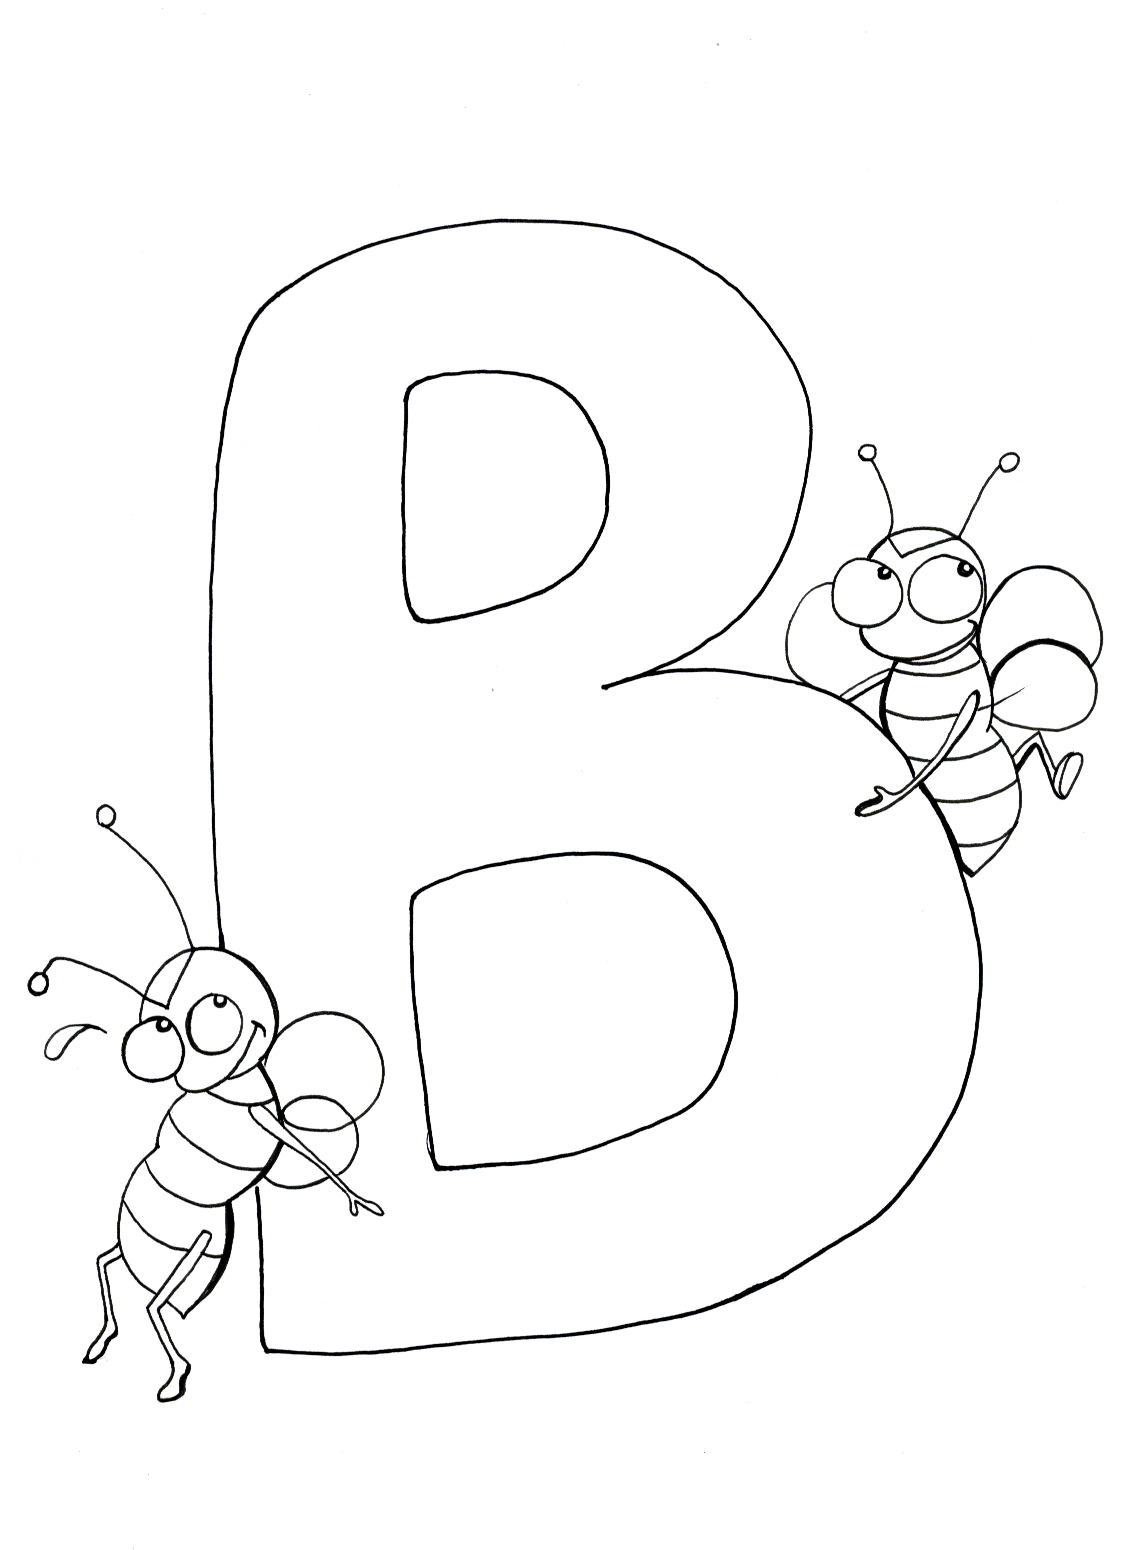 Letter B Coloring Pages Printable - Printable Word Searches